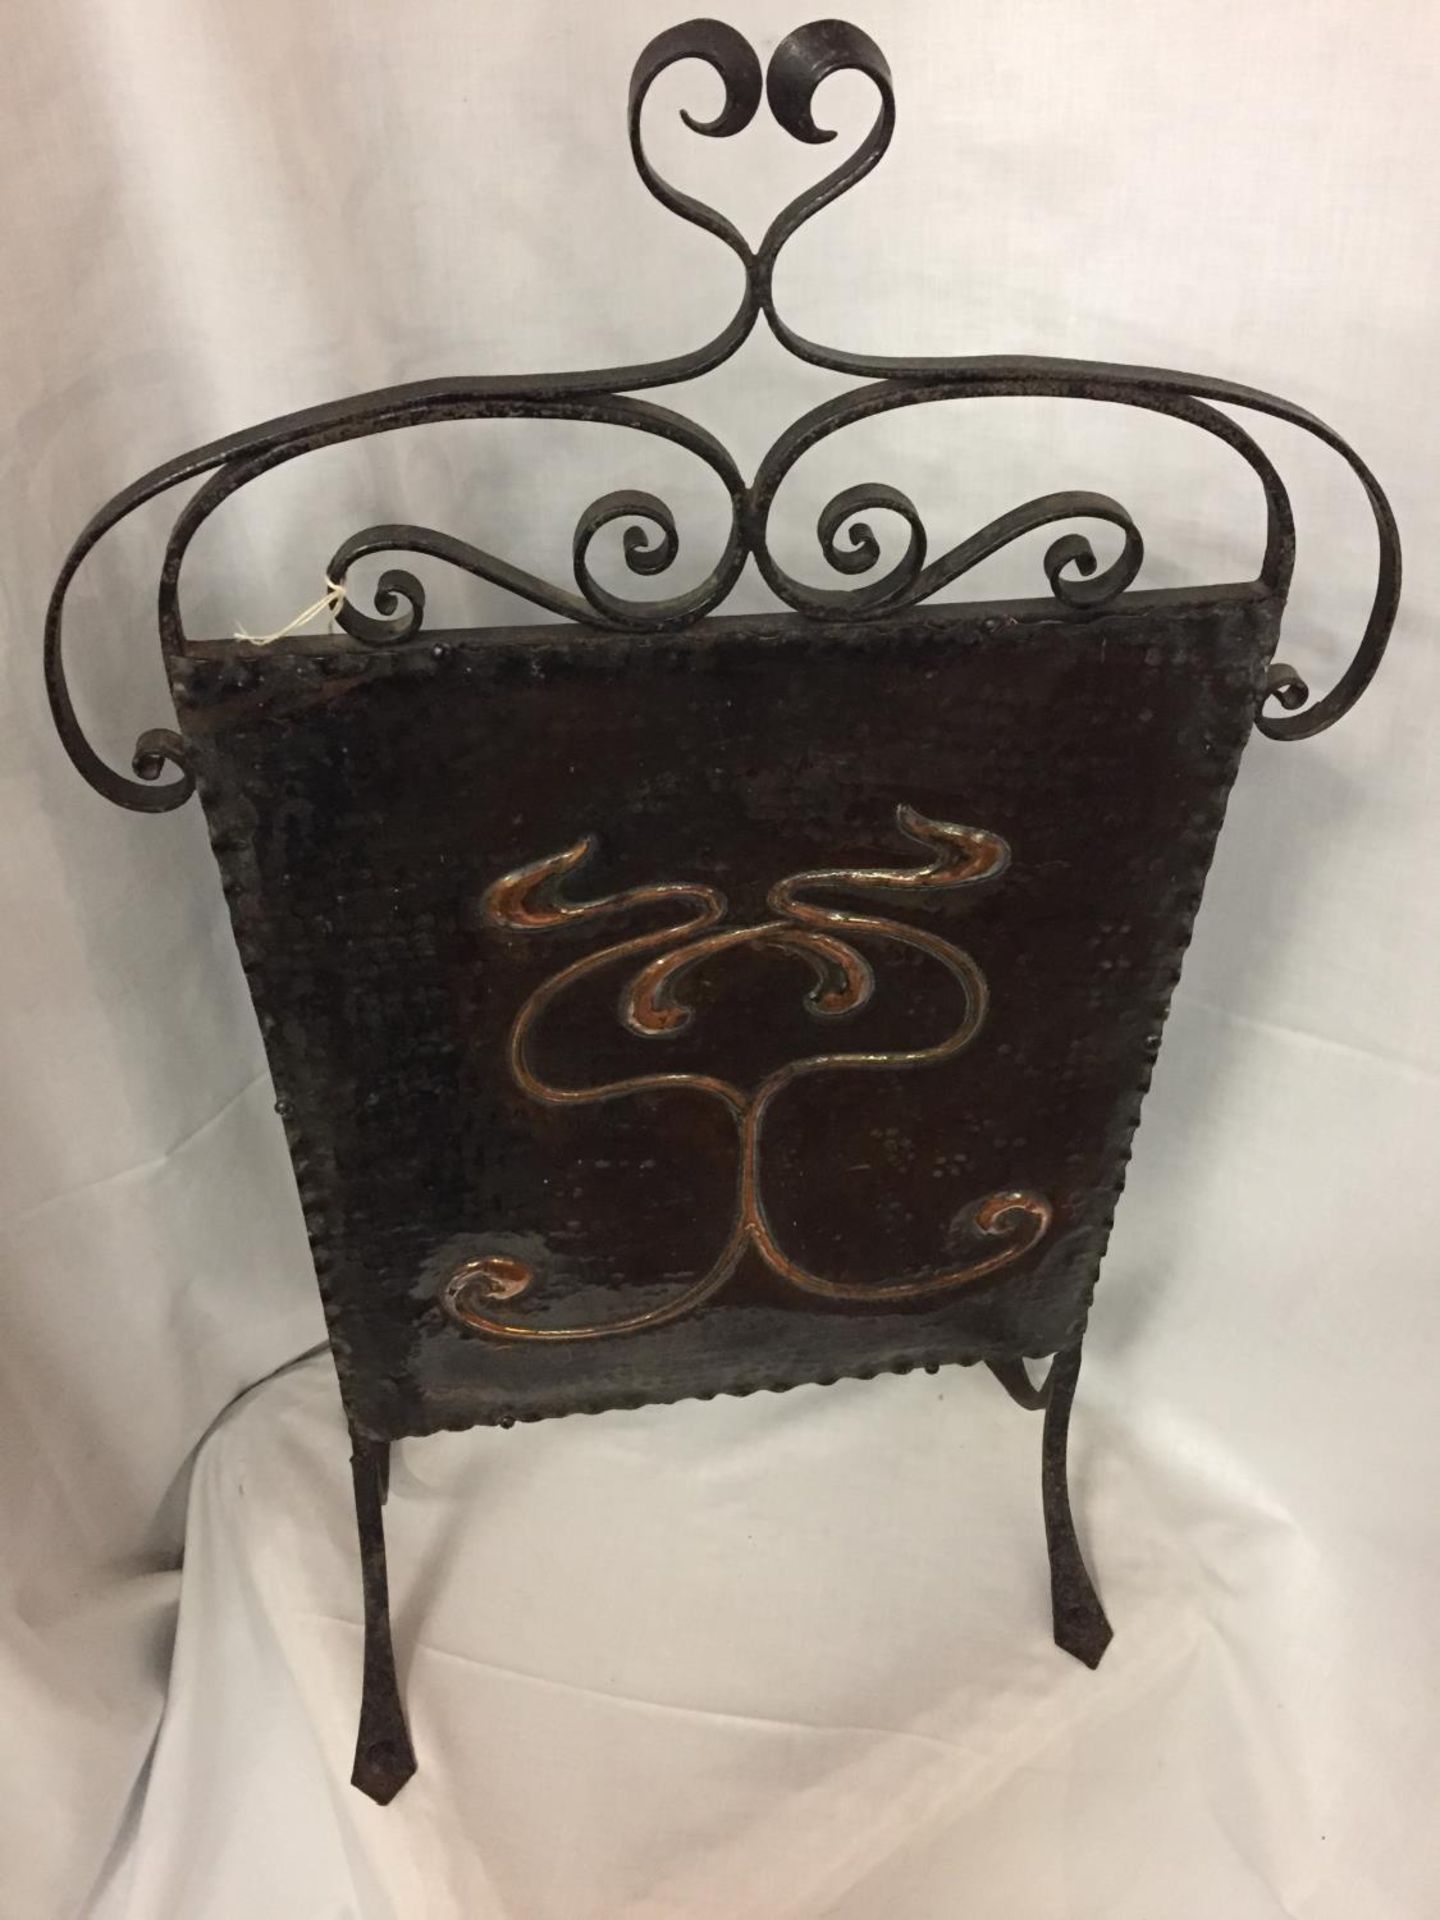 AN ARTS AND CRAFTS FIRE SCREEN WITH A DECORATIVE COPPER PANEL ON A WROUGHT IRON FRAME - Image 2 of 3